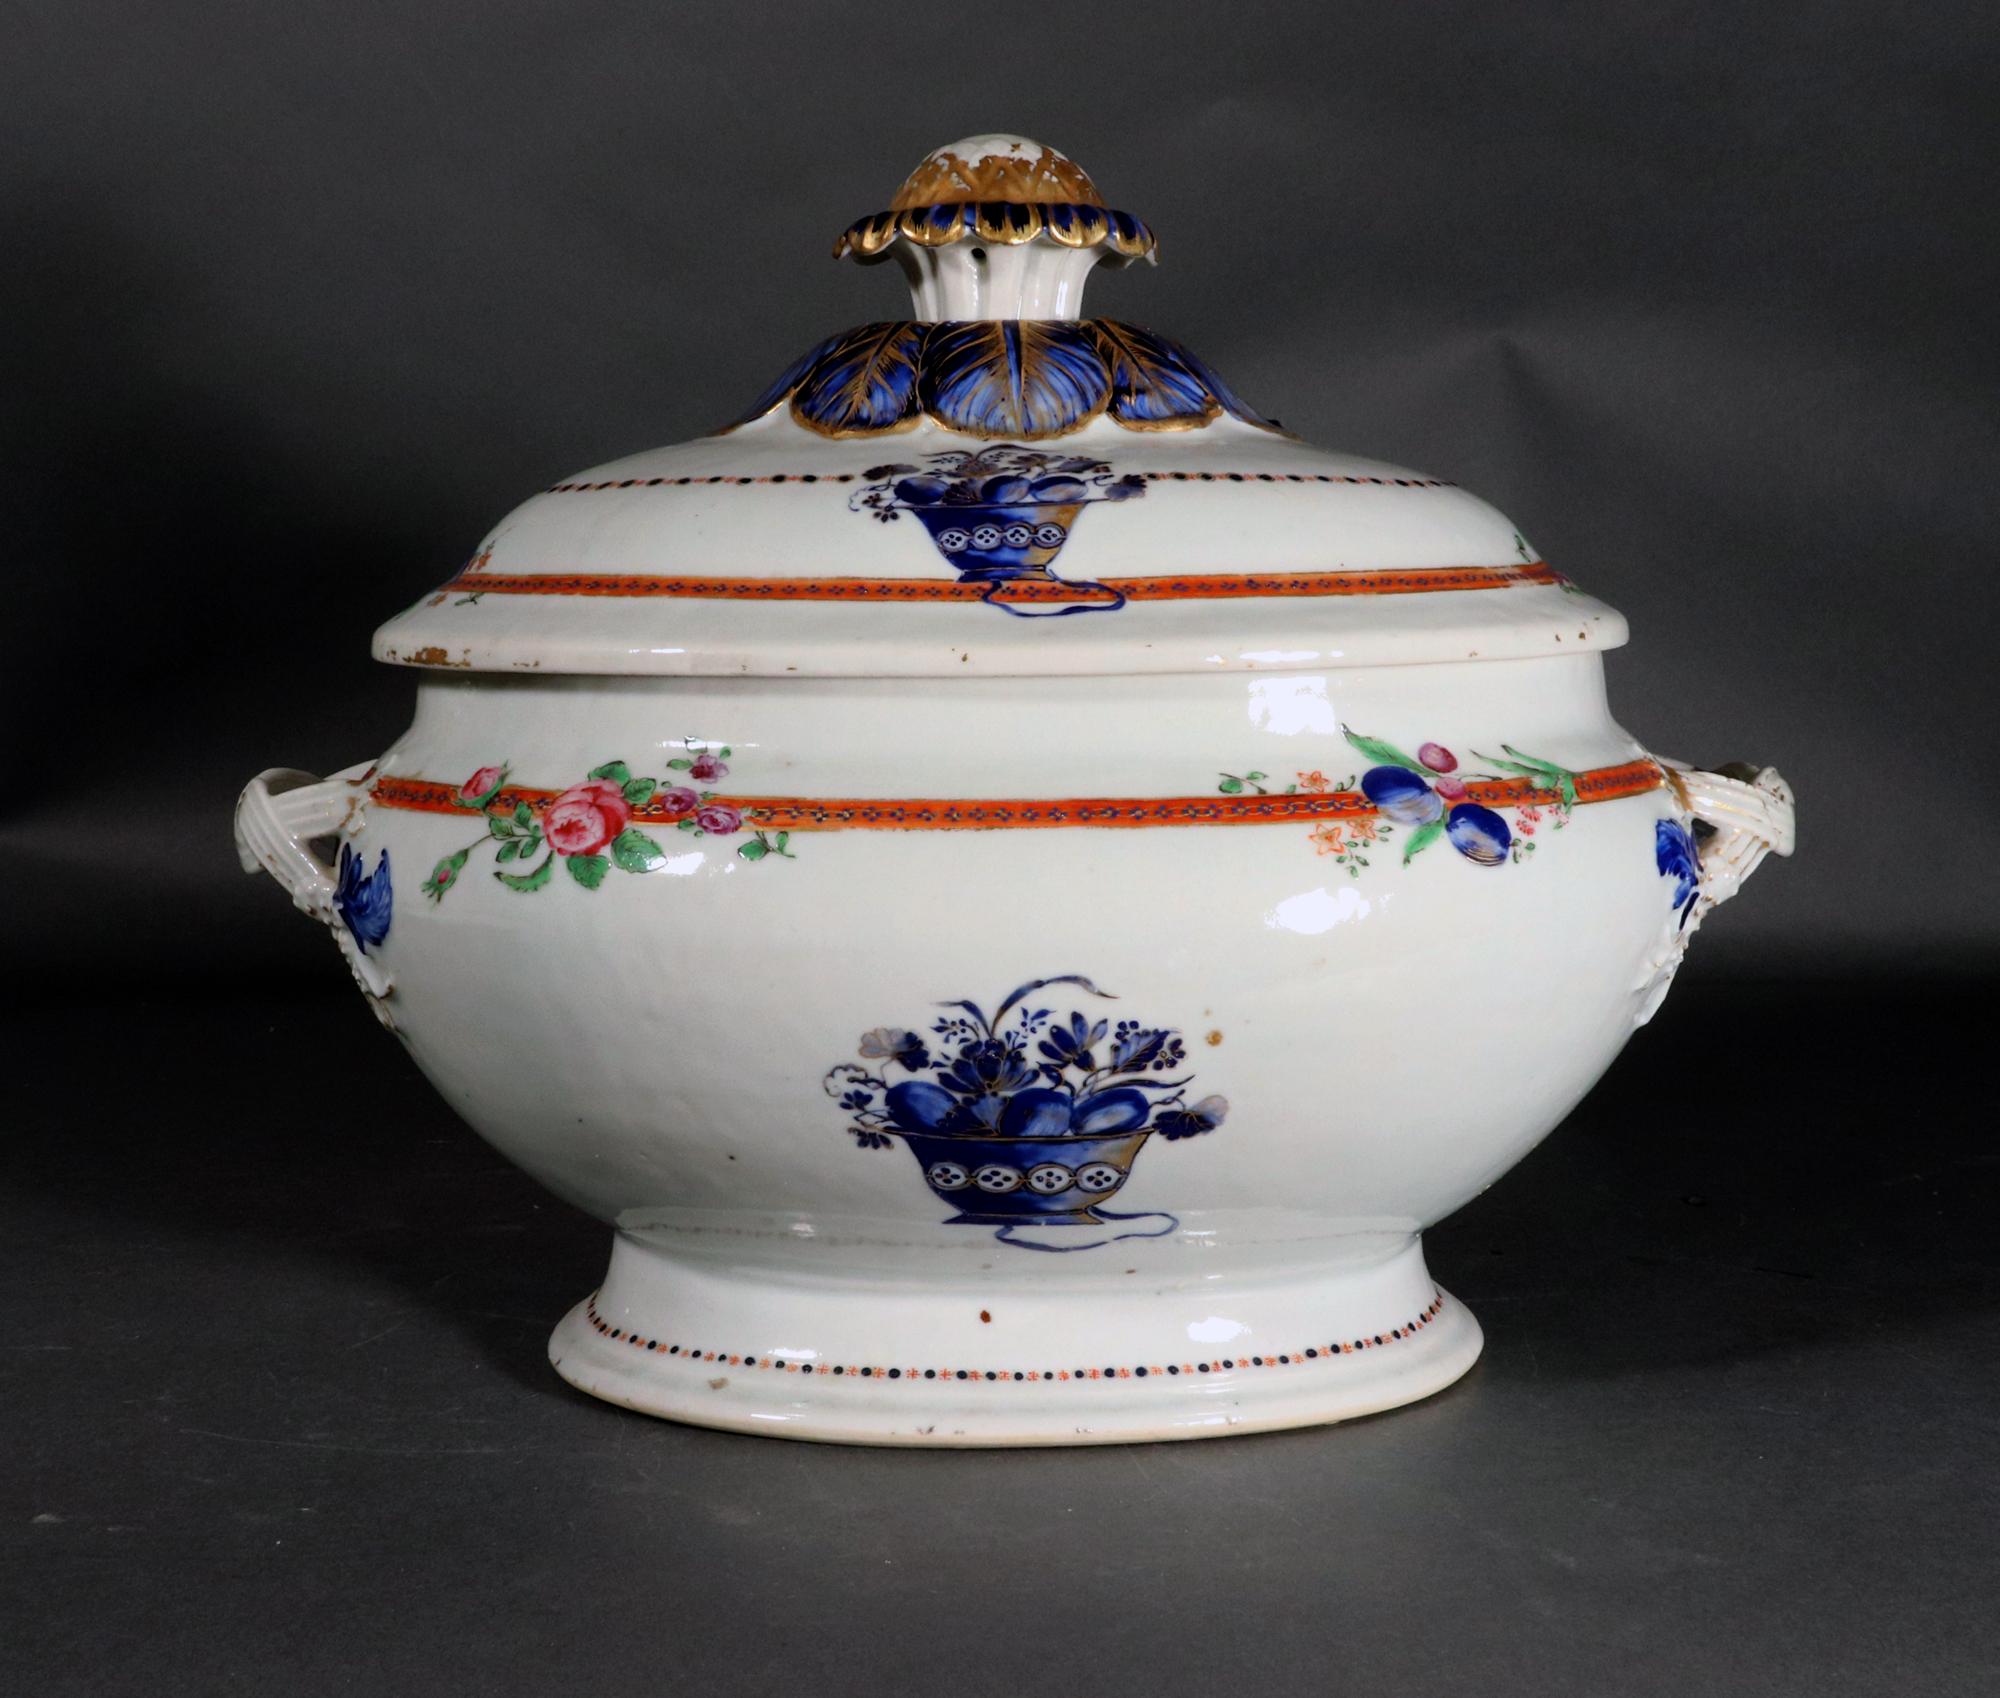 Chinese Export Porcelain American Market Soup Tureen, Cover and Stand In Good Condition For Sale In Downingtown, PA